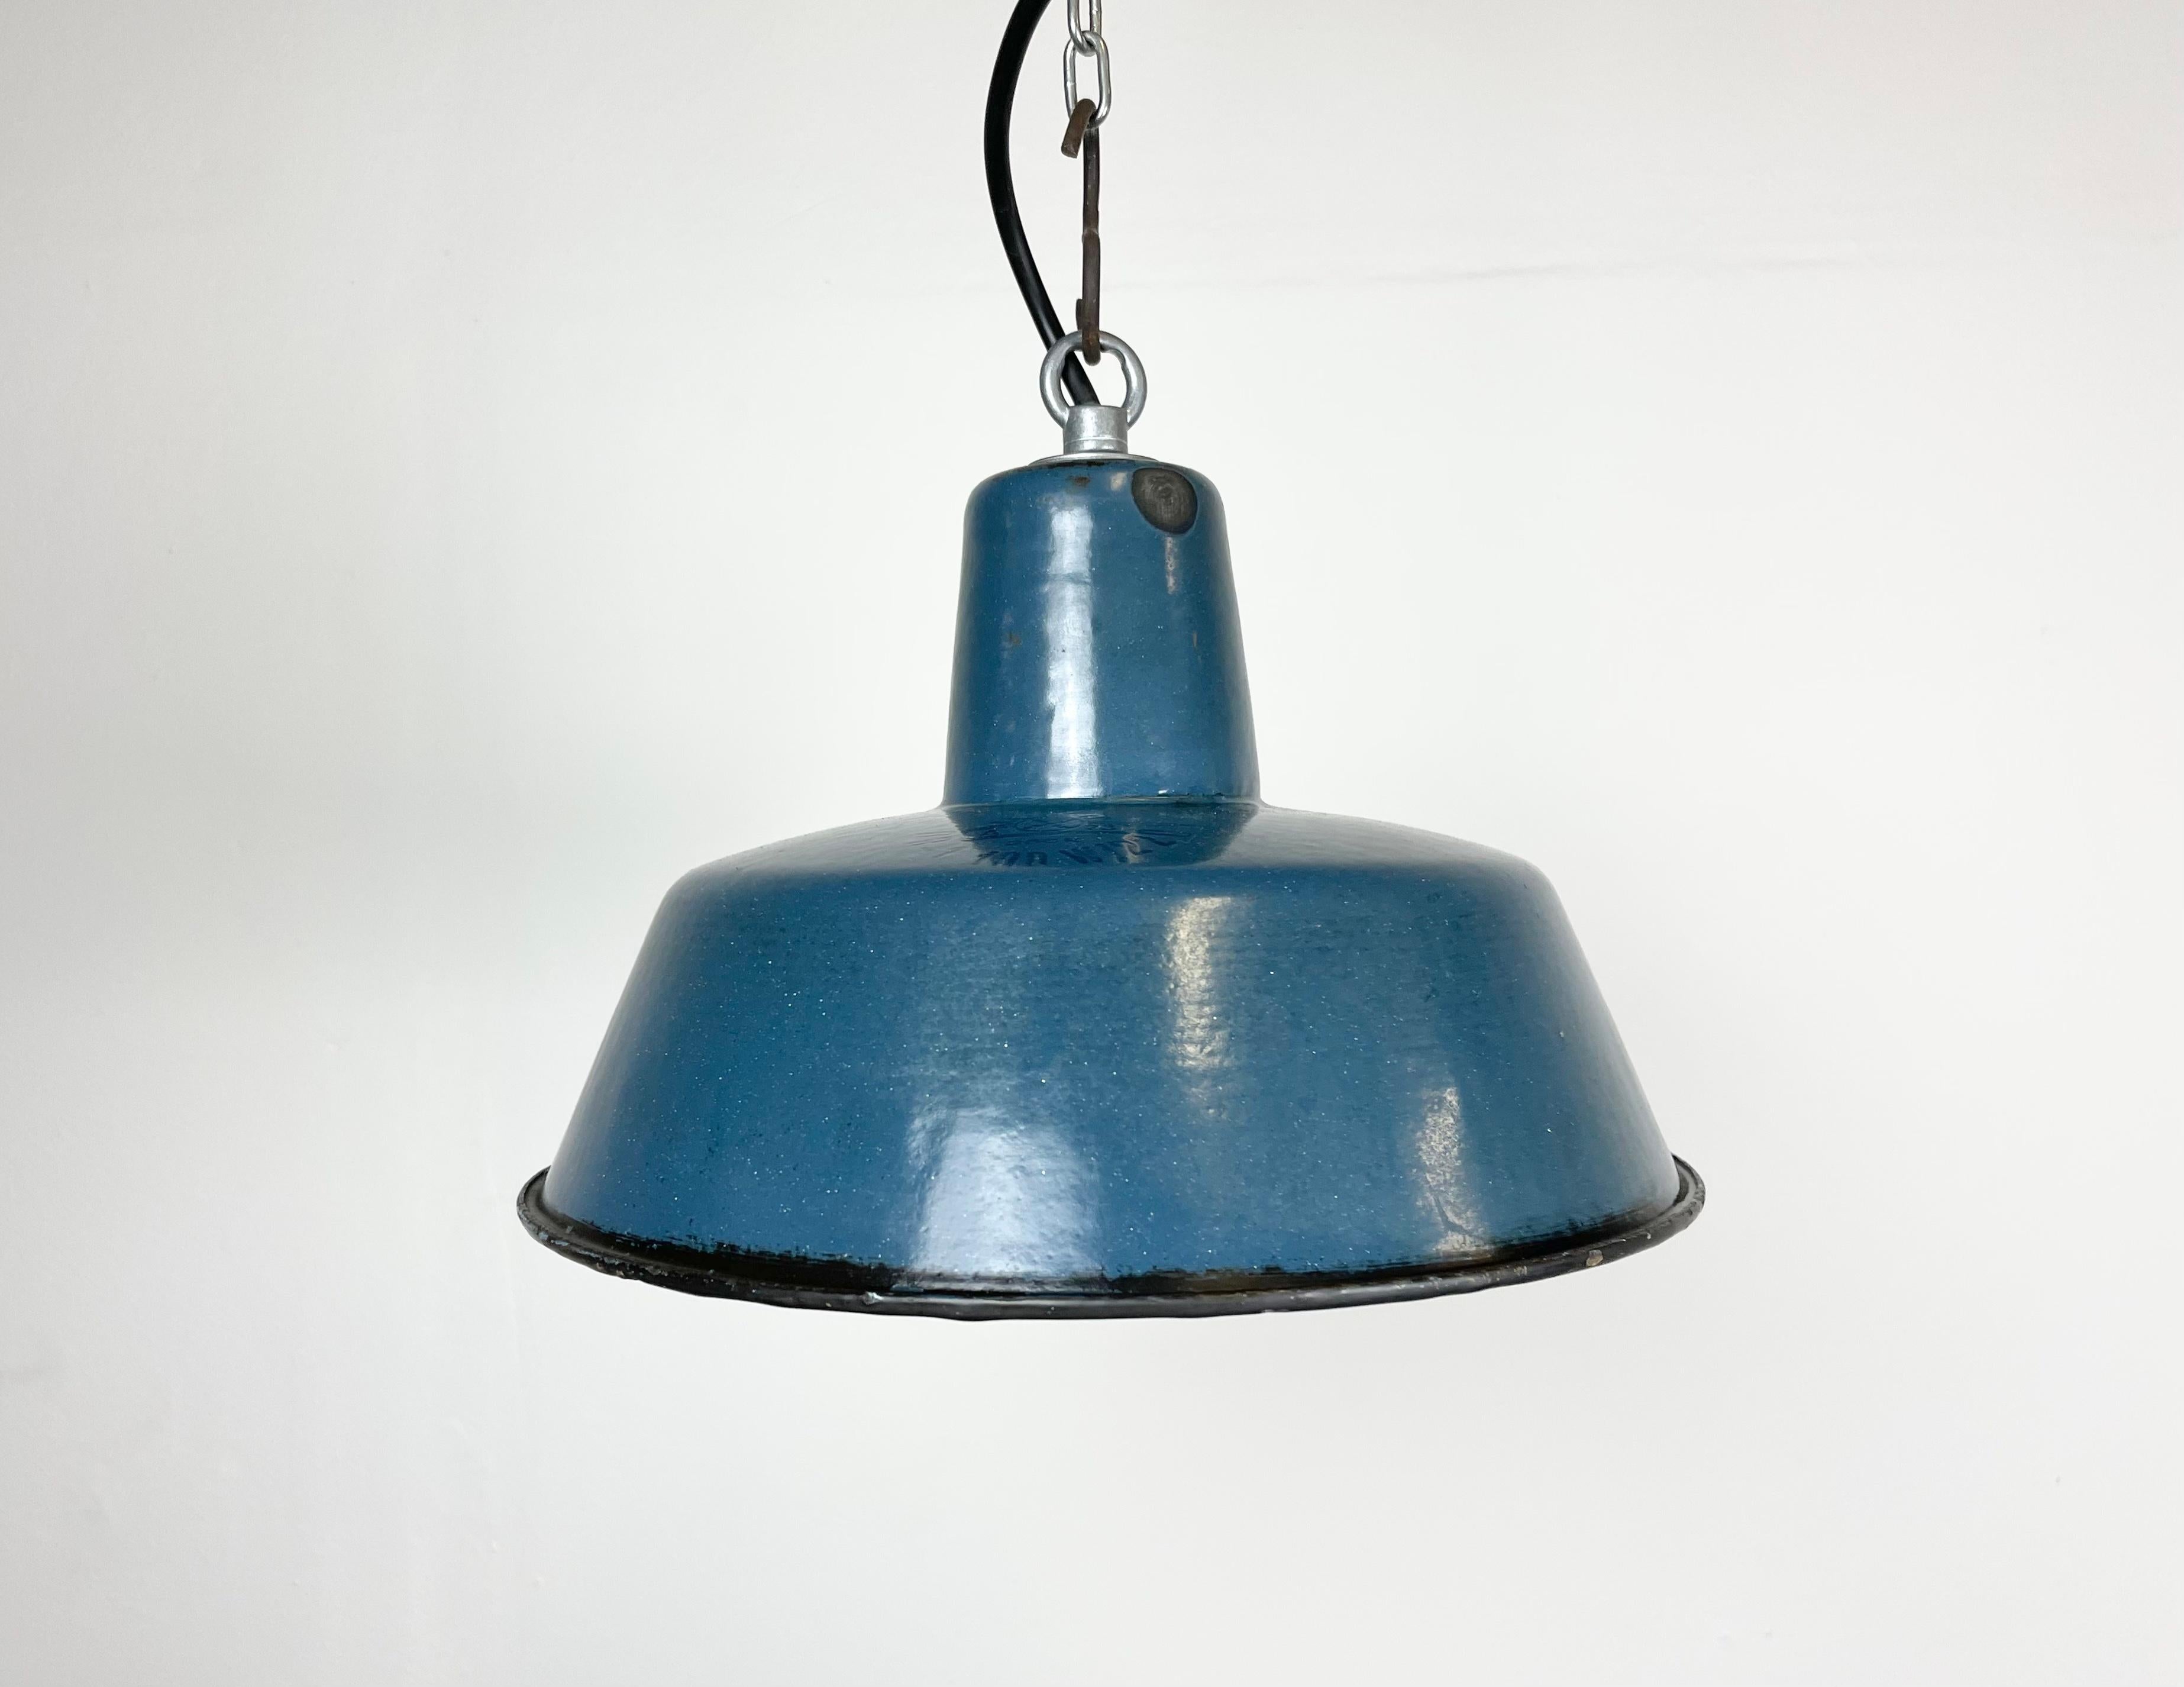 Industrial blue enamel pendant light made in Poland during the 1960s. White enamel inside the shade. Iron top. The porcelain socket requires E 27 light bulbs. New wire. Fully functional. The weight of the lamp is 0,8 kg.